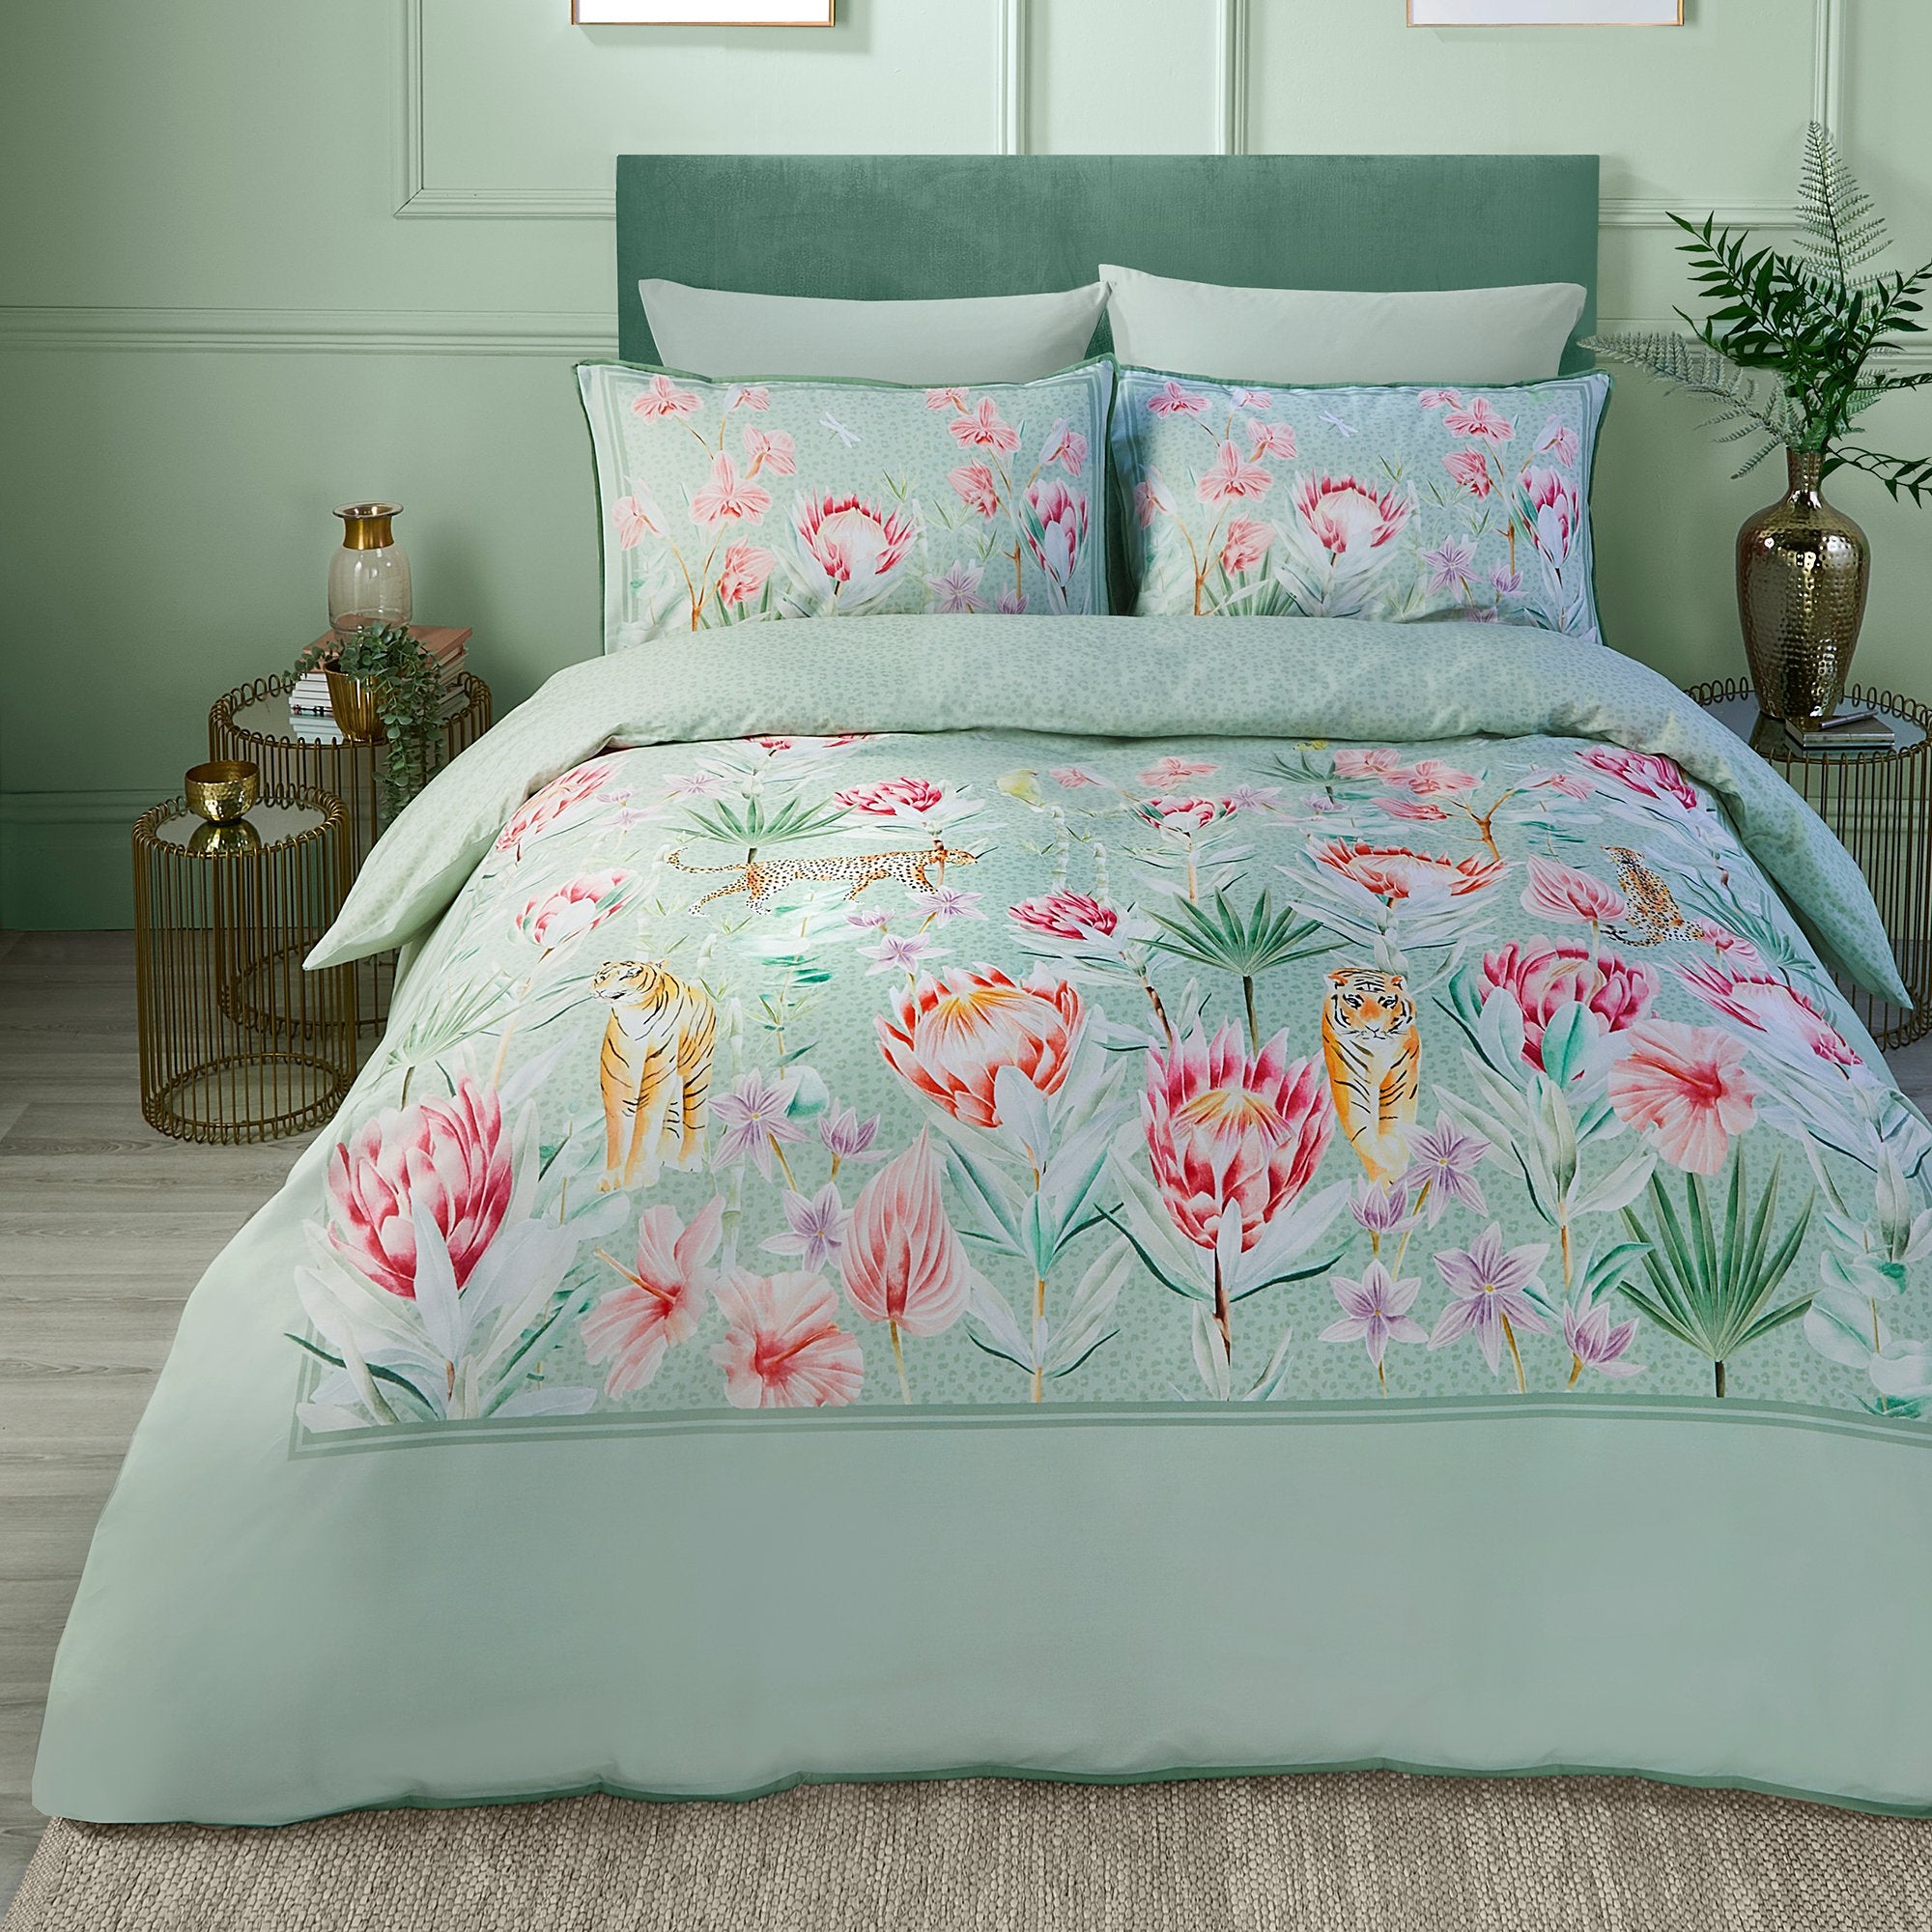 Duvet Cover Set Tropical Leopard by Soiree in Green